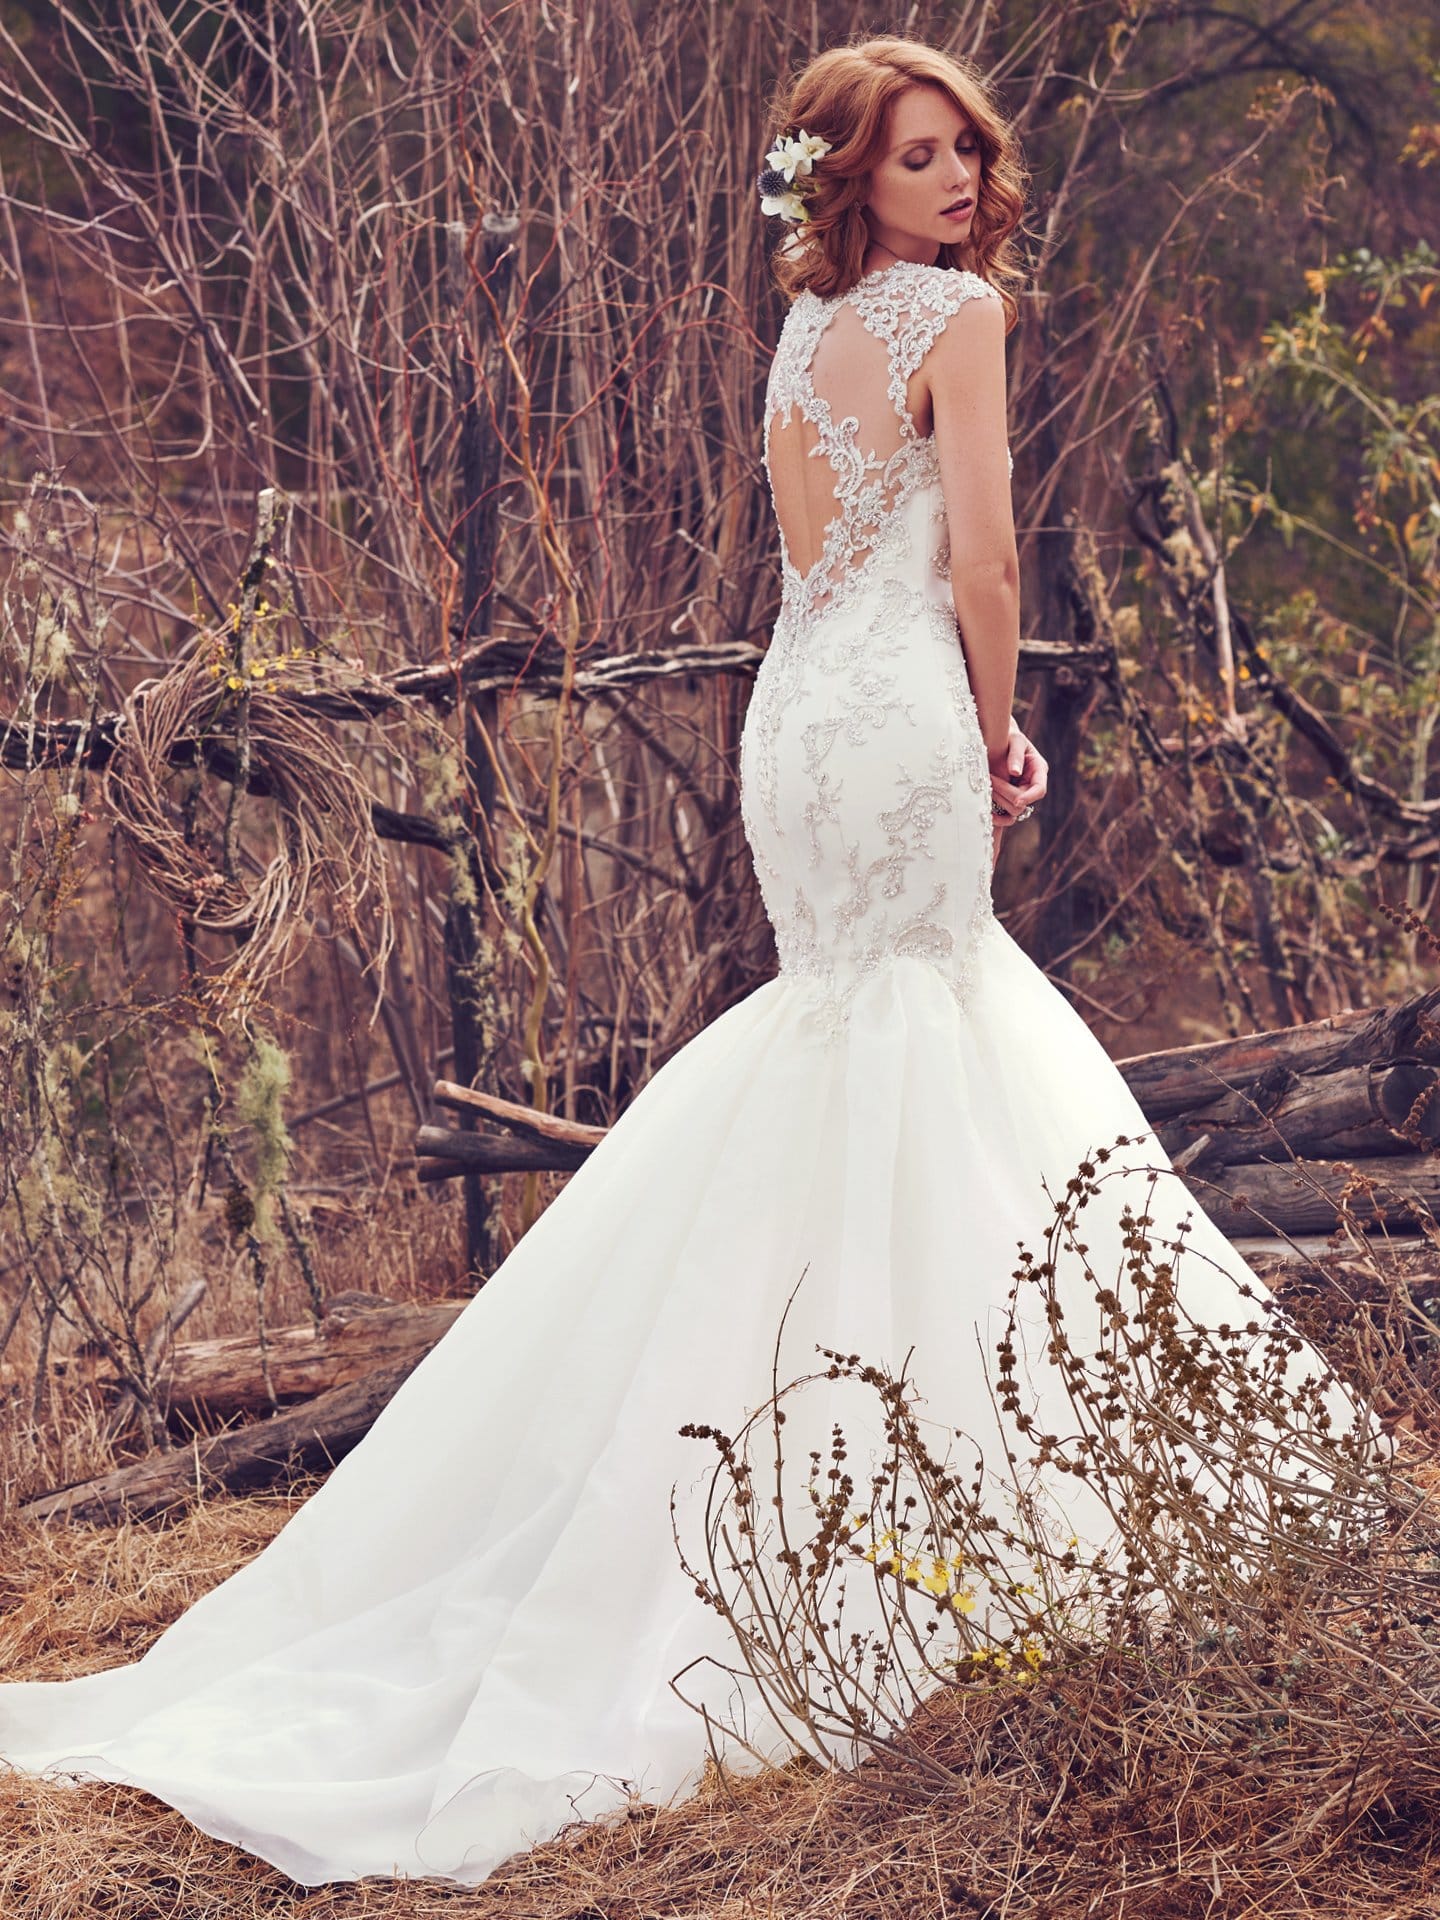 Beautiful statement-back wedding dresses from Maggie Sottero and Sottero and Midgley - Illusion cap-sleeves and an illusion keyhole back accented with lace appliqués complete the soft glamour of this wedding dress. Payson by Maggie Sottero.